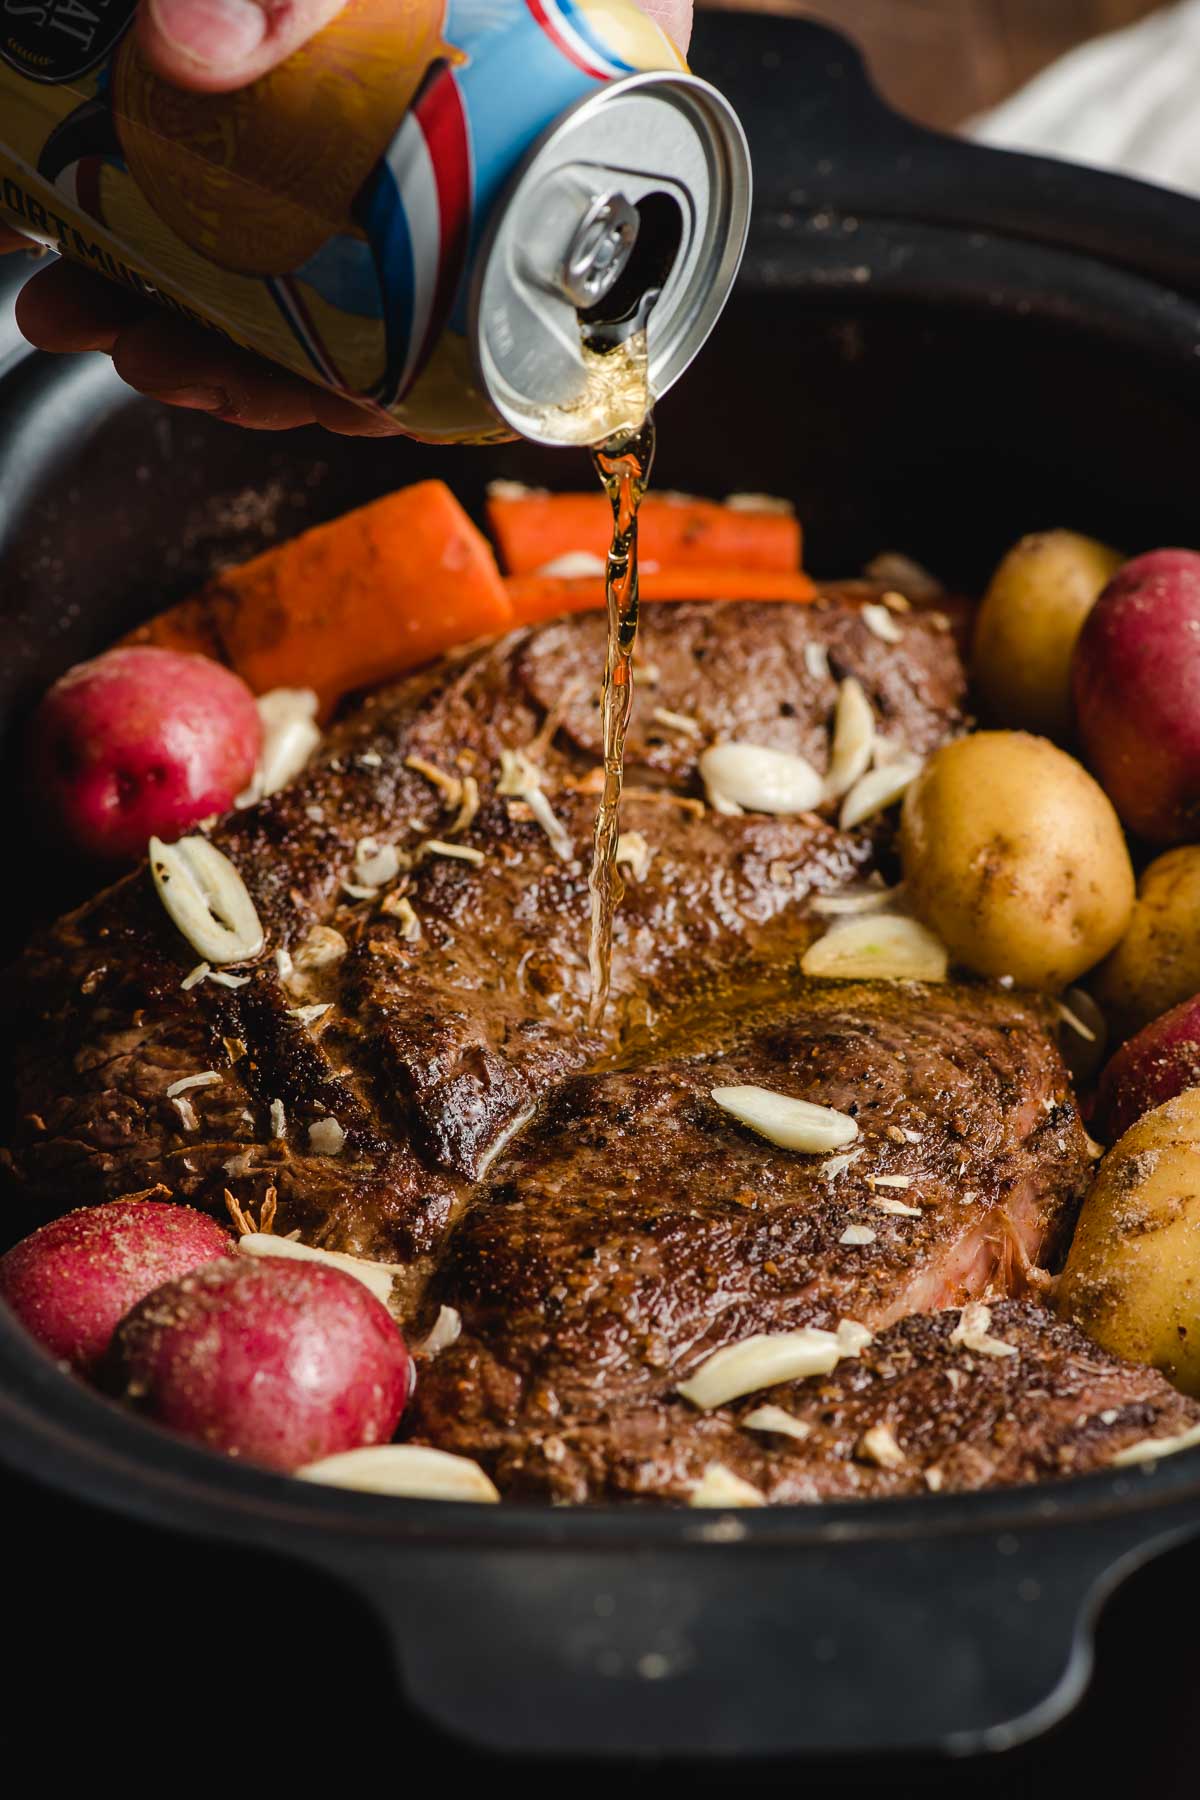 Can of beer being poured over a pot roast in a crock pot.